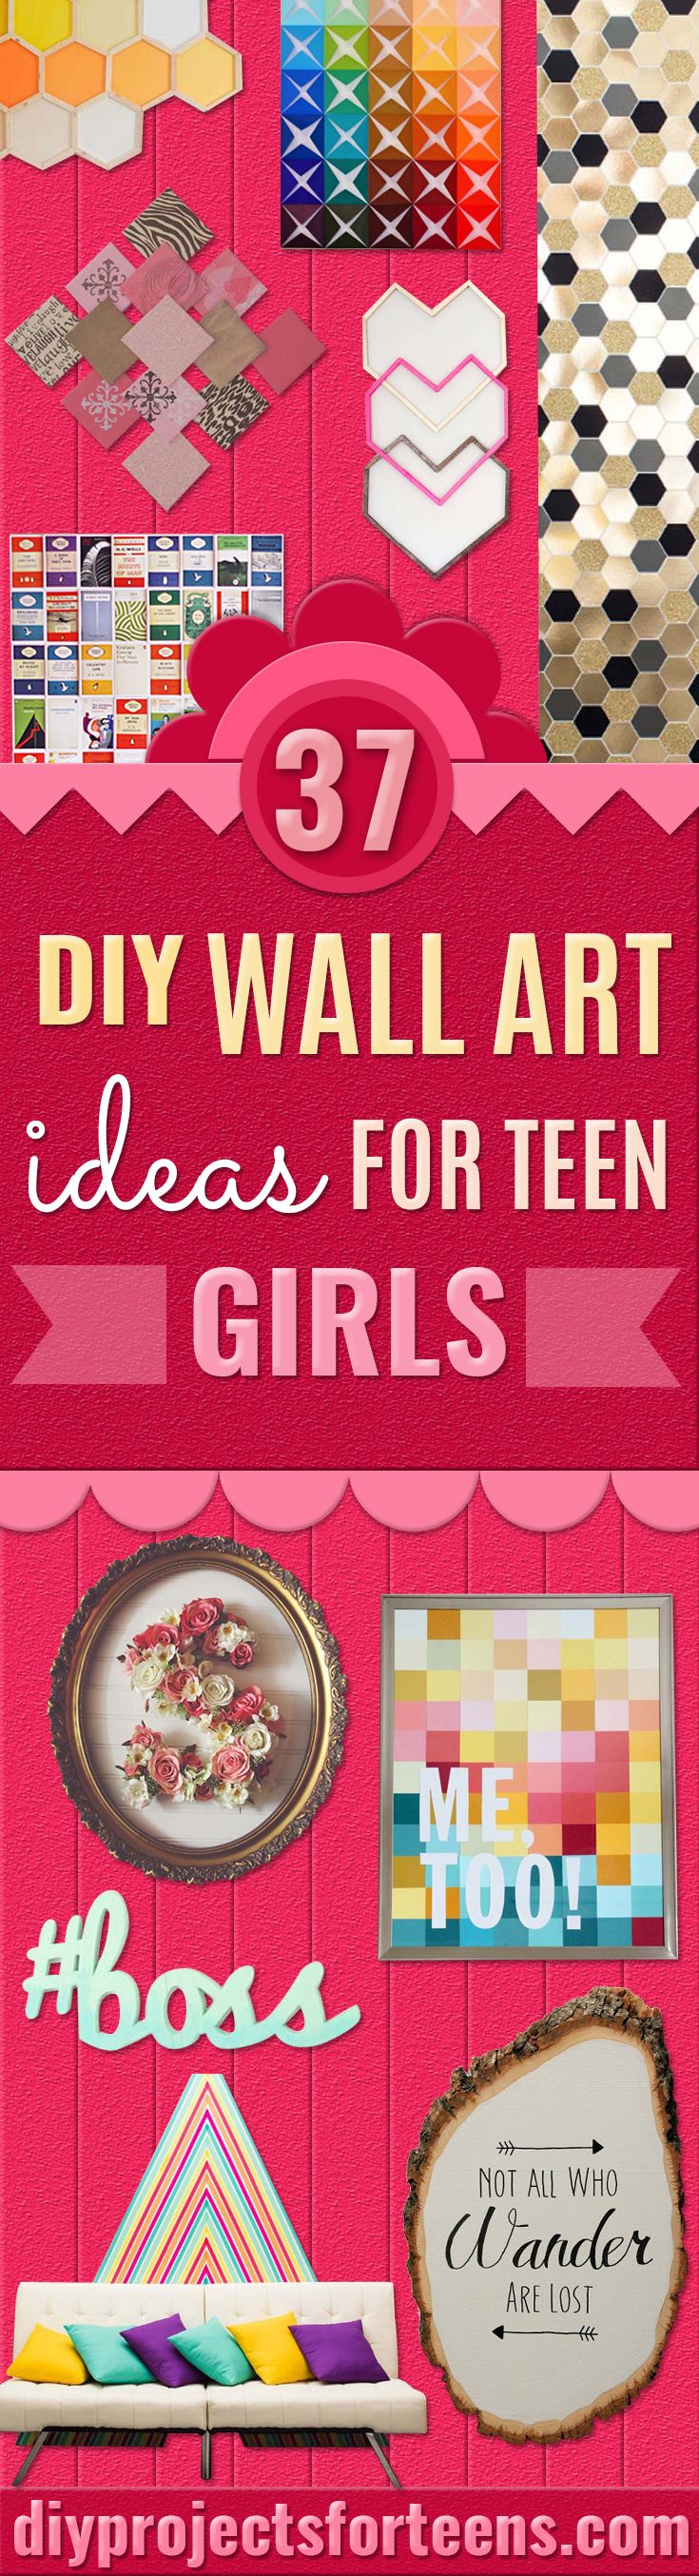 37 Awesome DIY Wall Art Ideas for Teen Girls